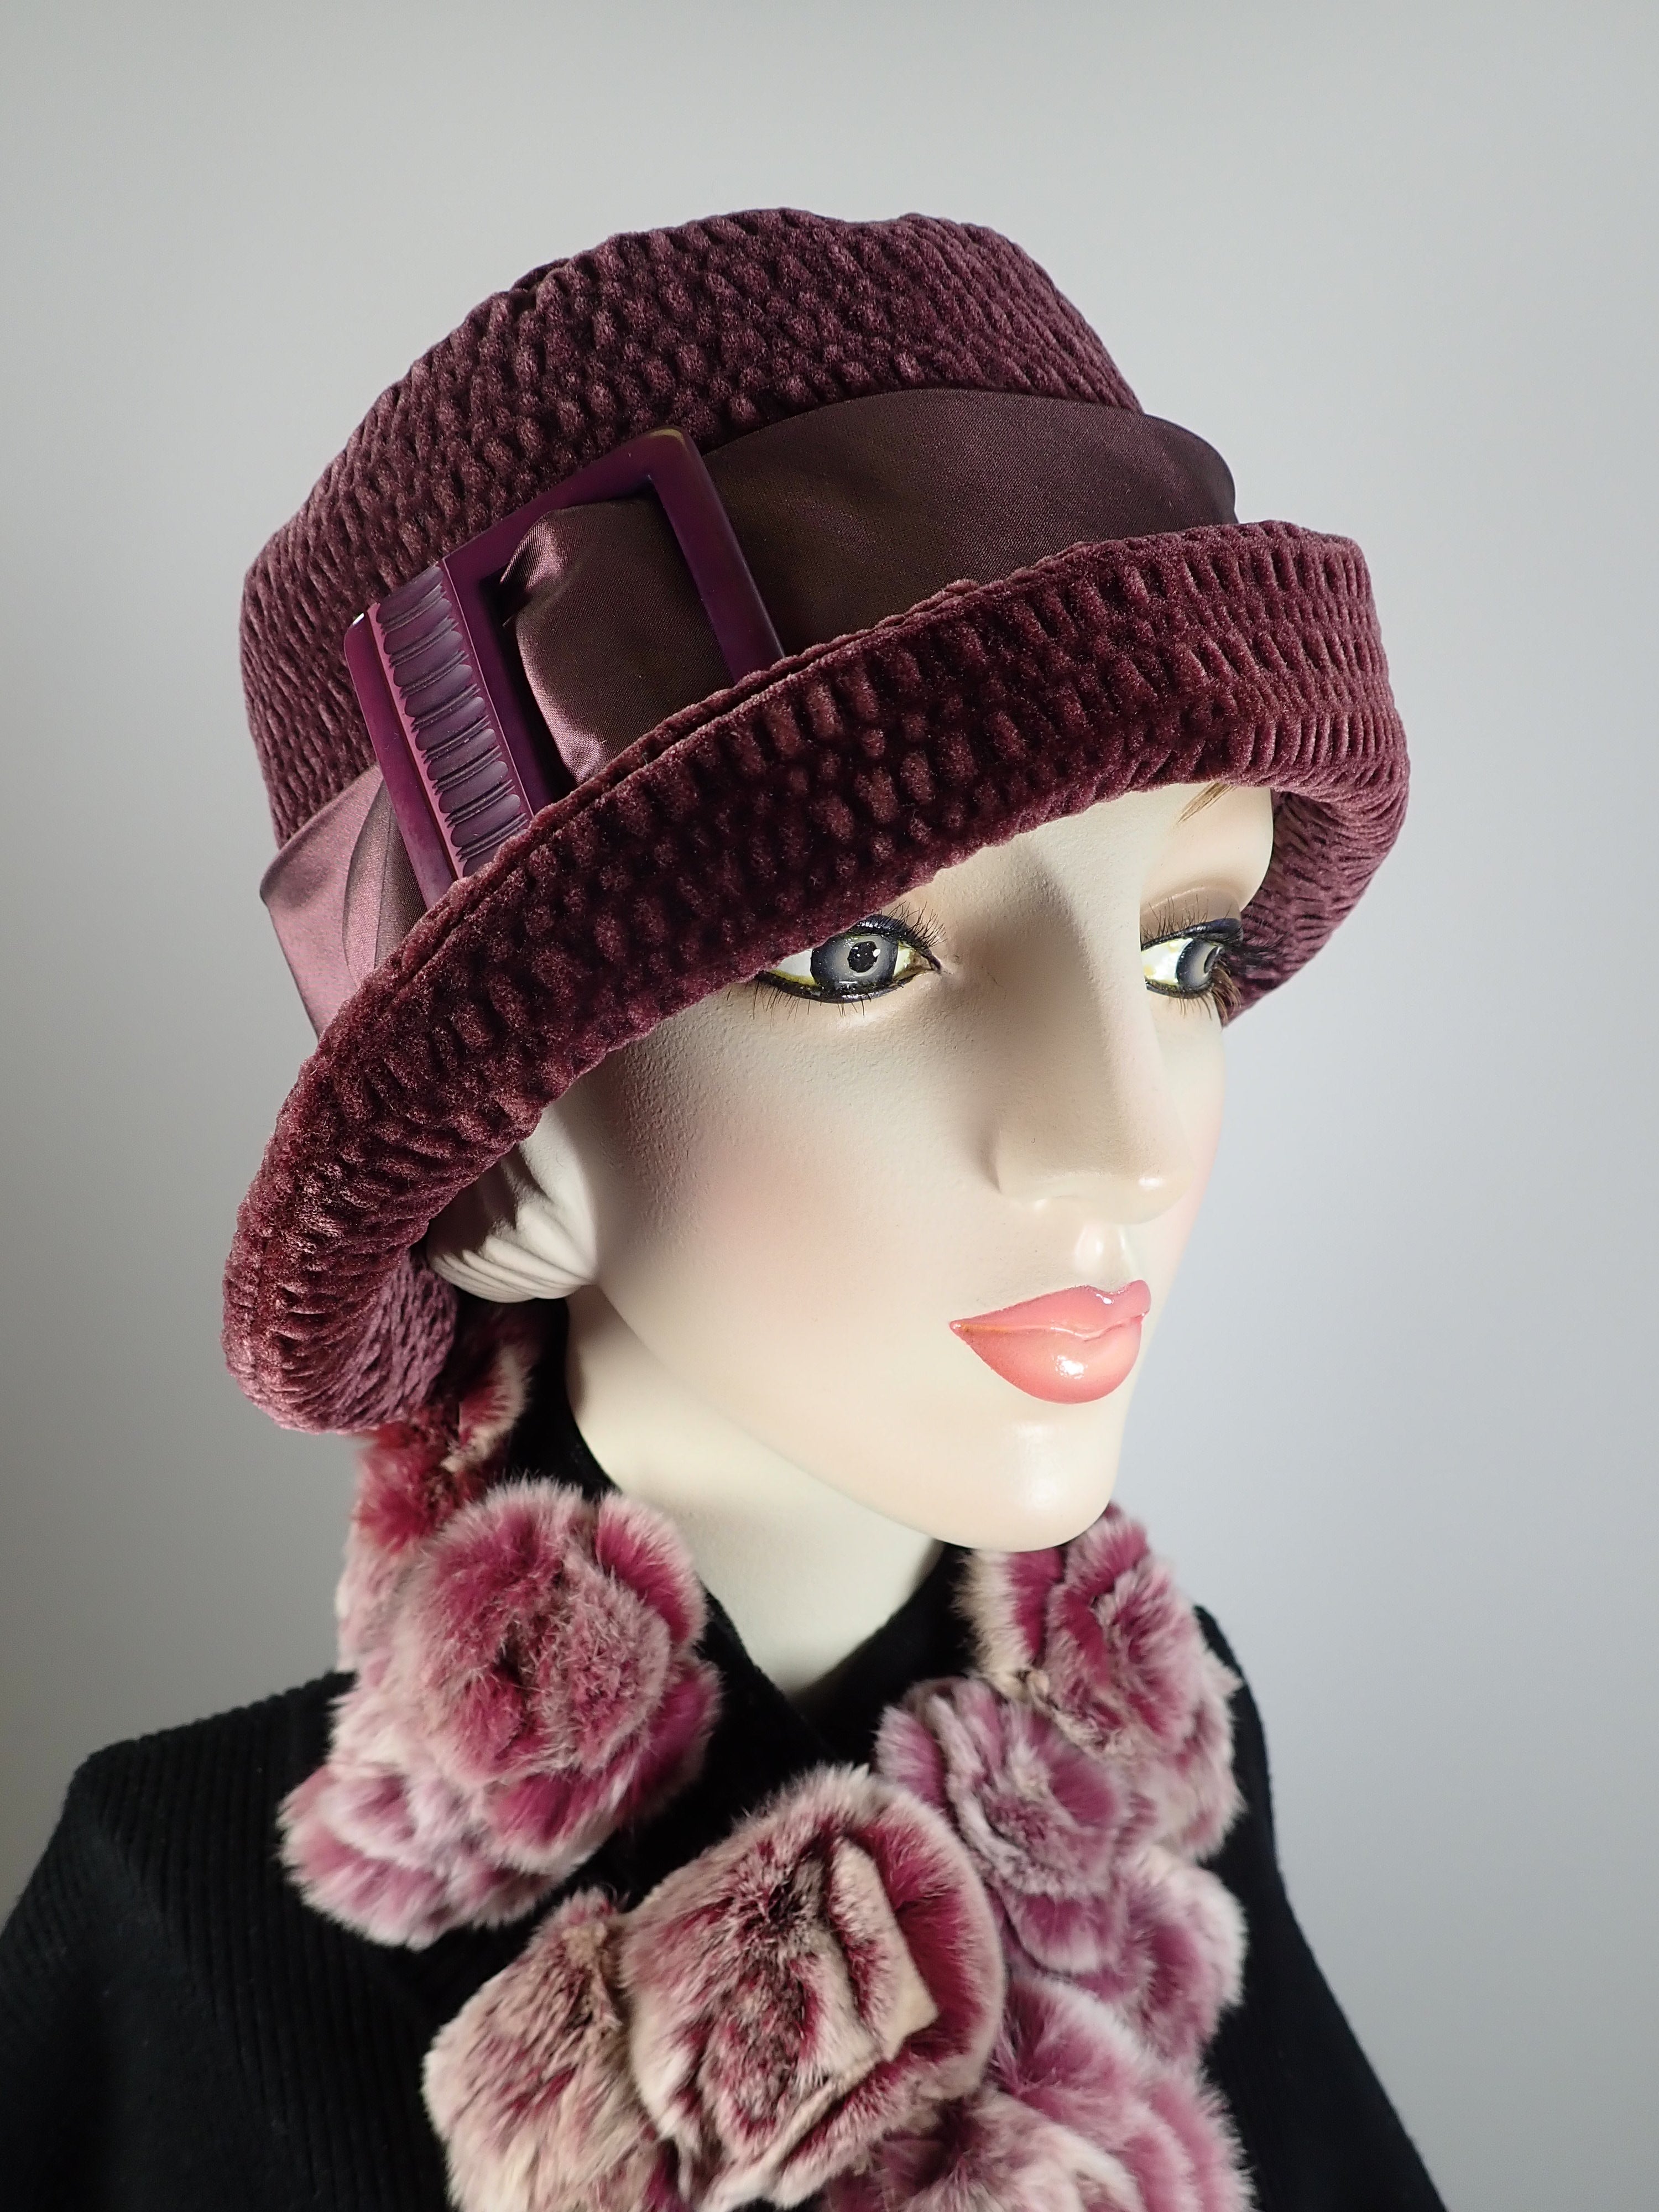 Eggplant purple velvet cloche hat. Flapper womens bucket hat. Small br –  What a Great Hat